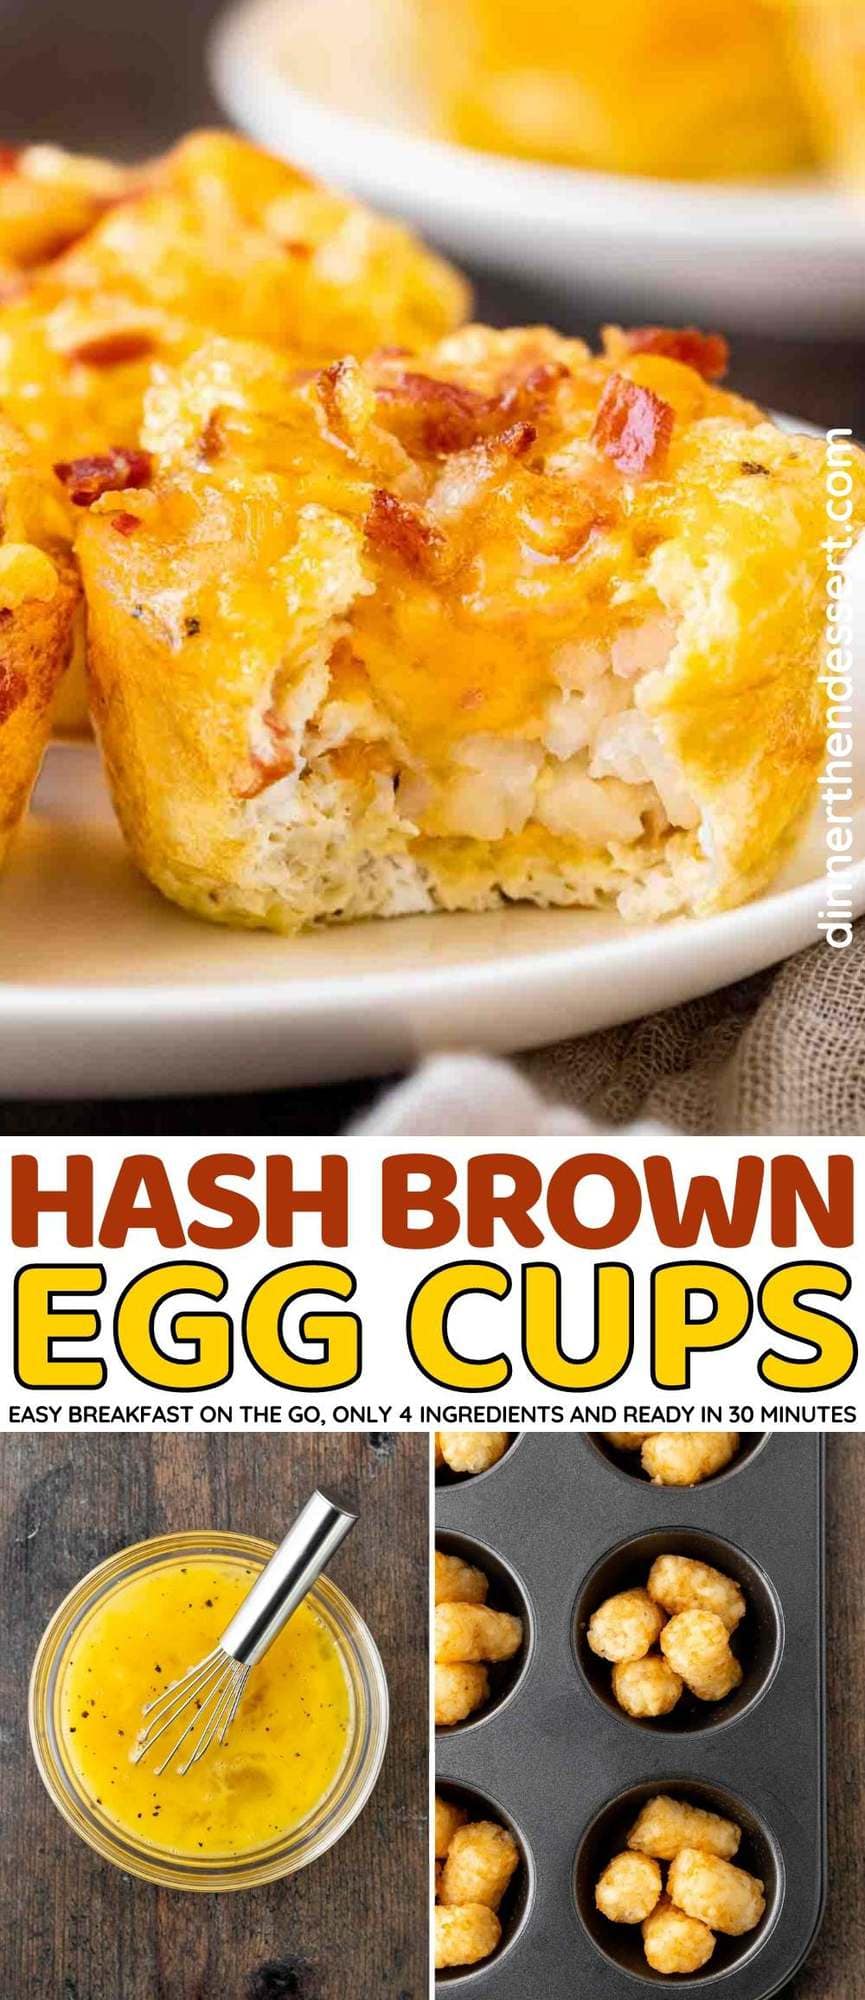 Hash Brown Egg Cups collage